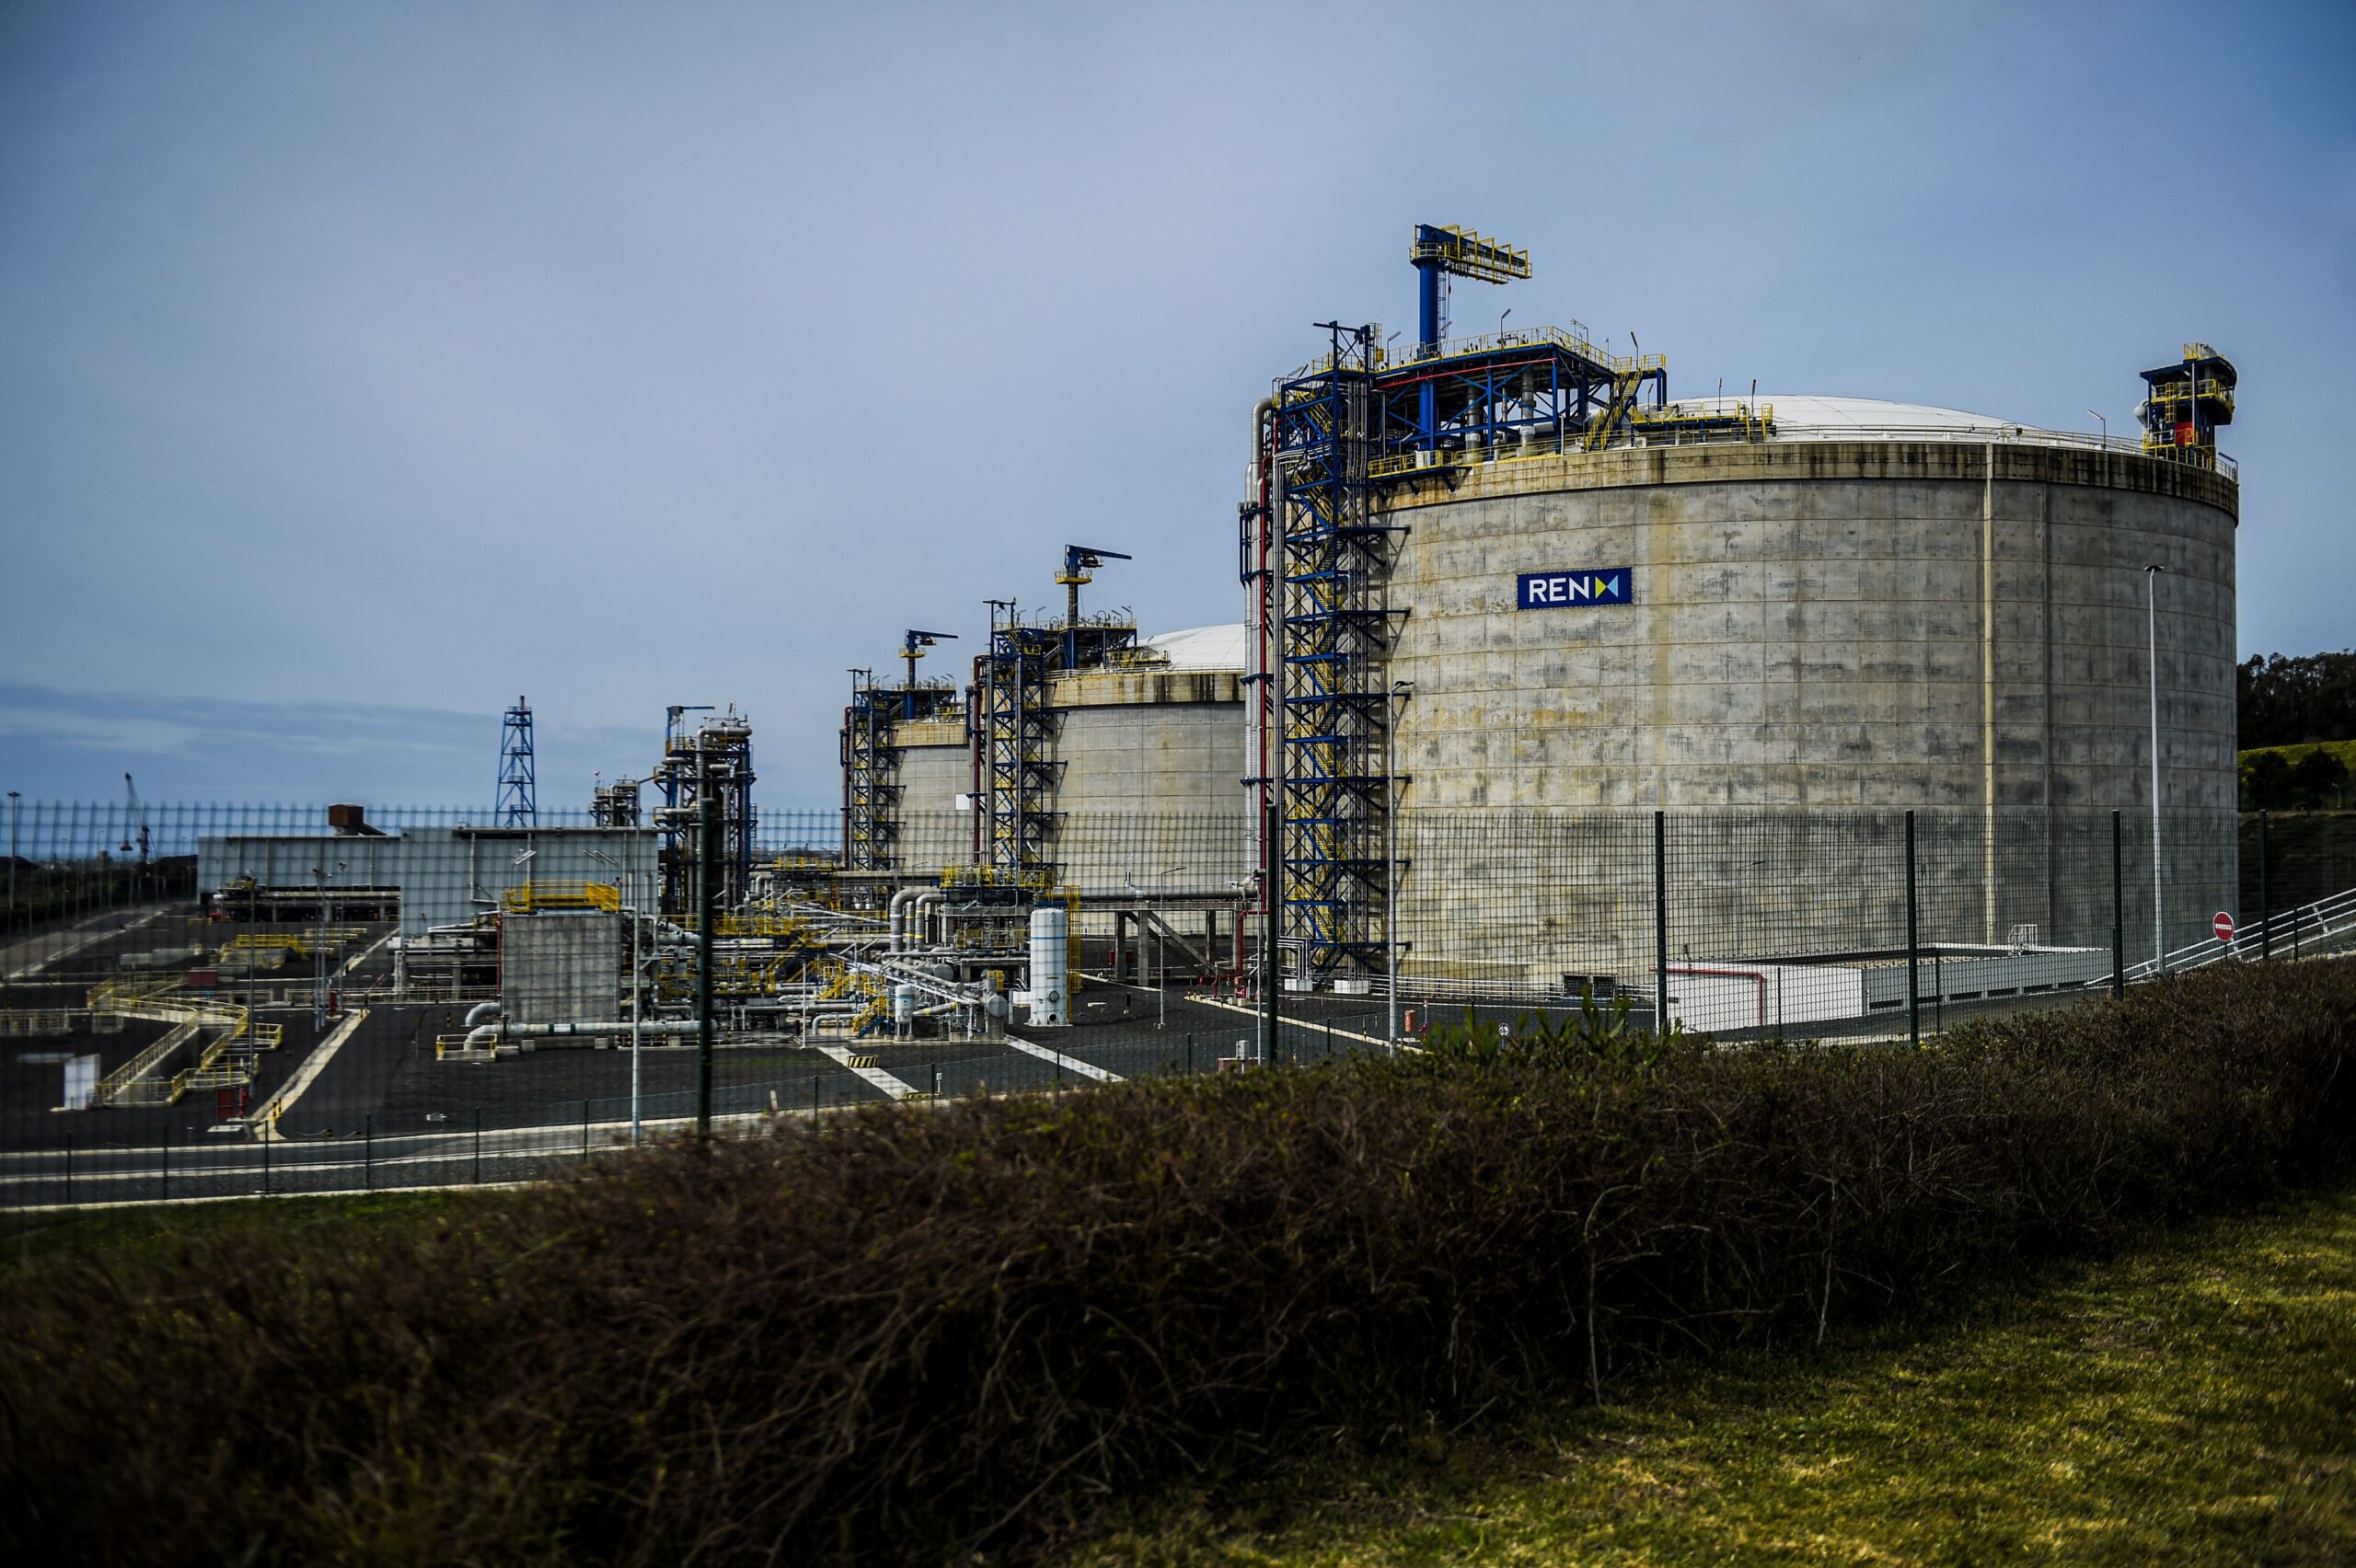 View of the LNG Liquified Natural Gas Terminal taken at Sines port in Sines on February 12, 2020. (Photo by PATRICIA DE MELO MOREIRA / AFP) (Photo by PATRICIA DE MELO MOREIRA/AFP via Getty Images) 